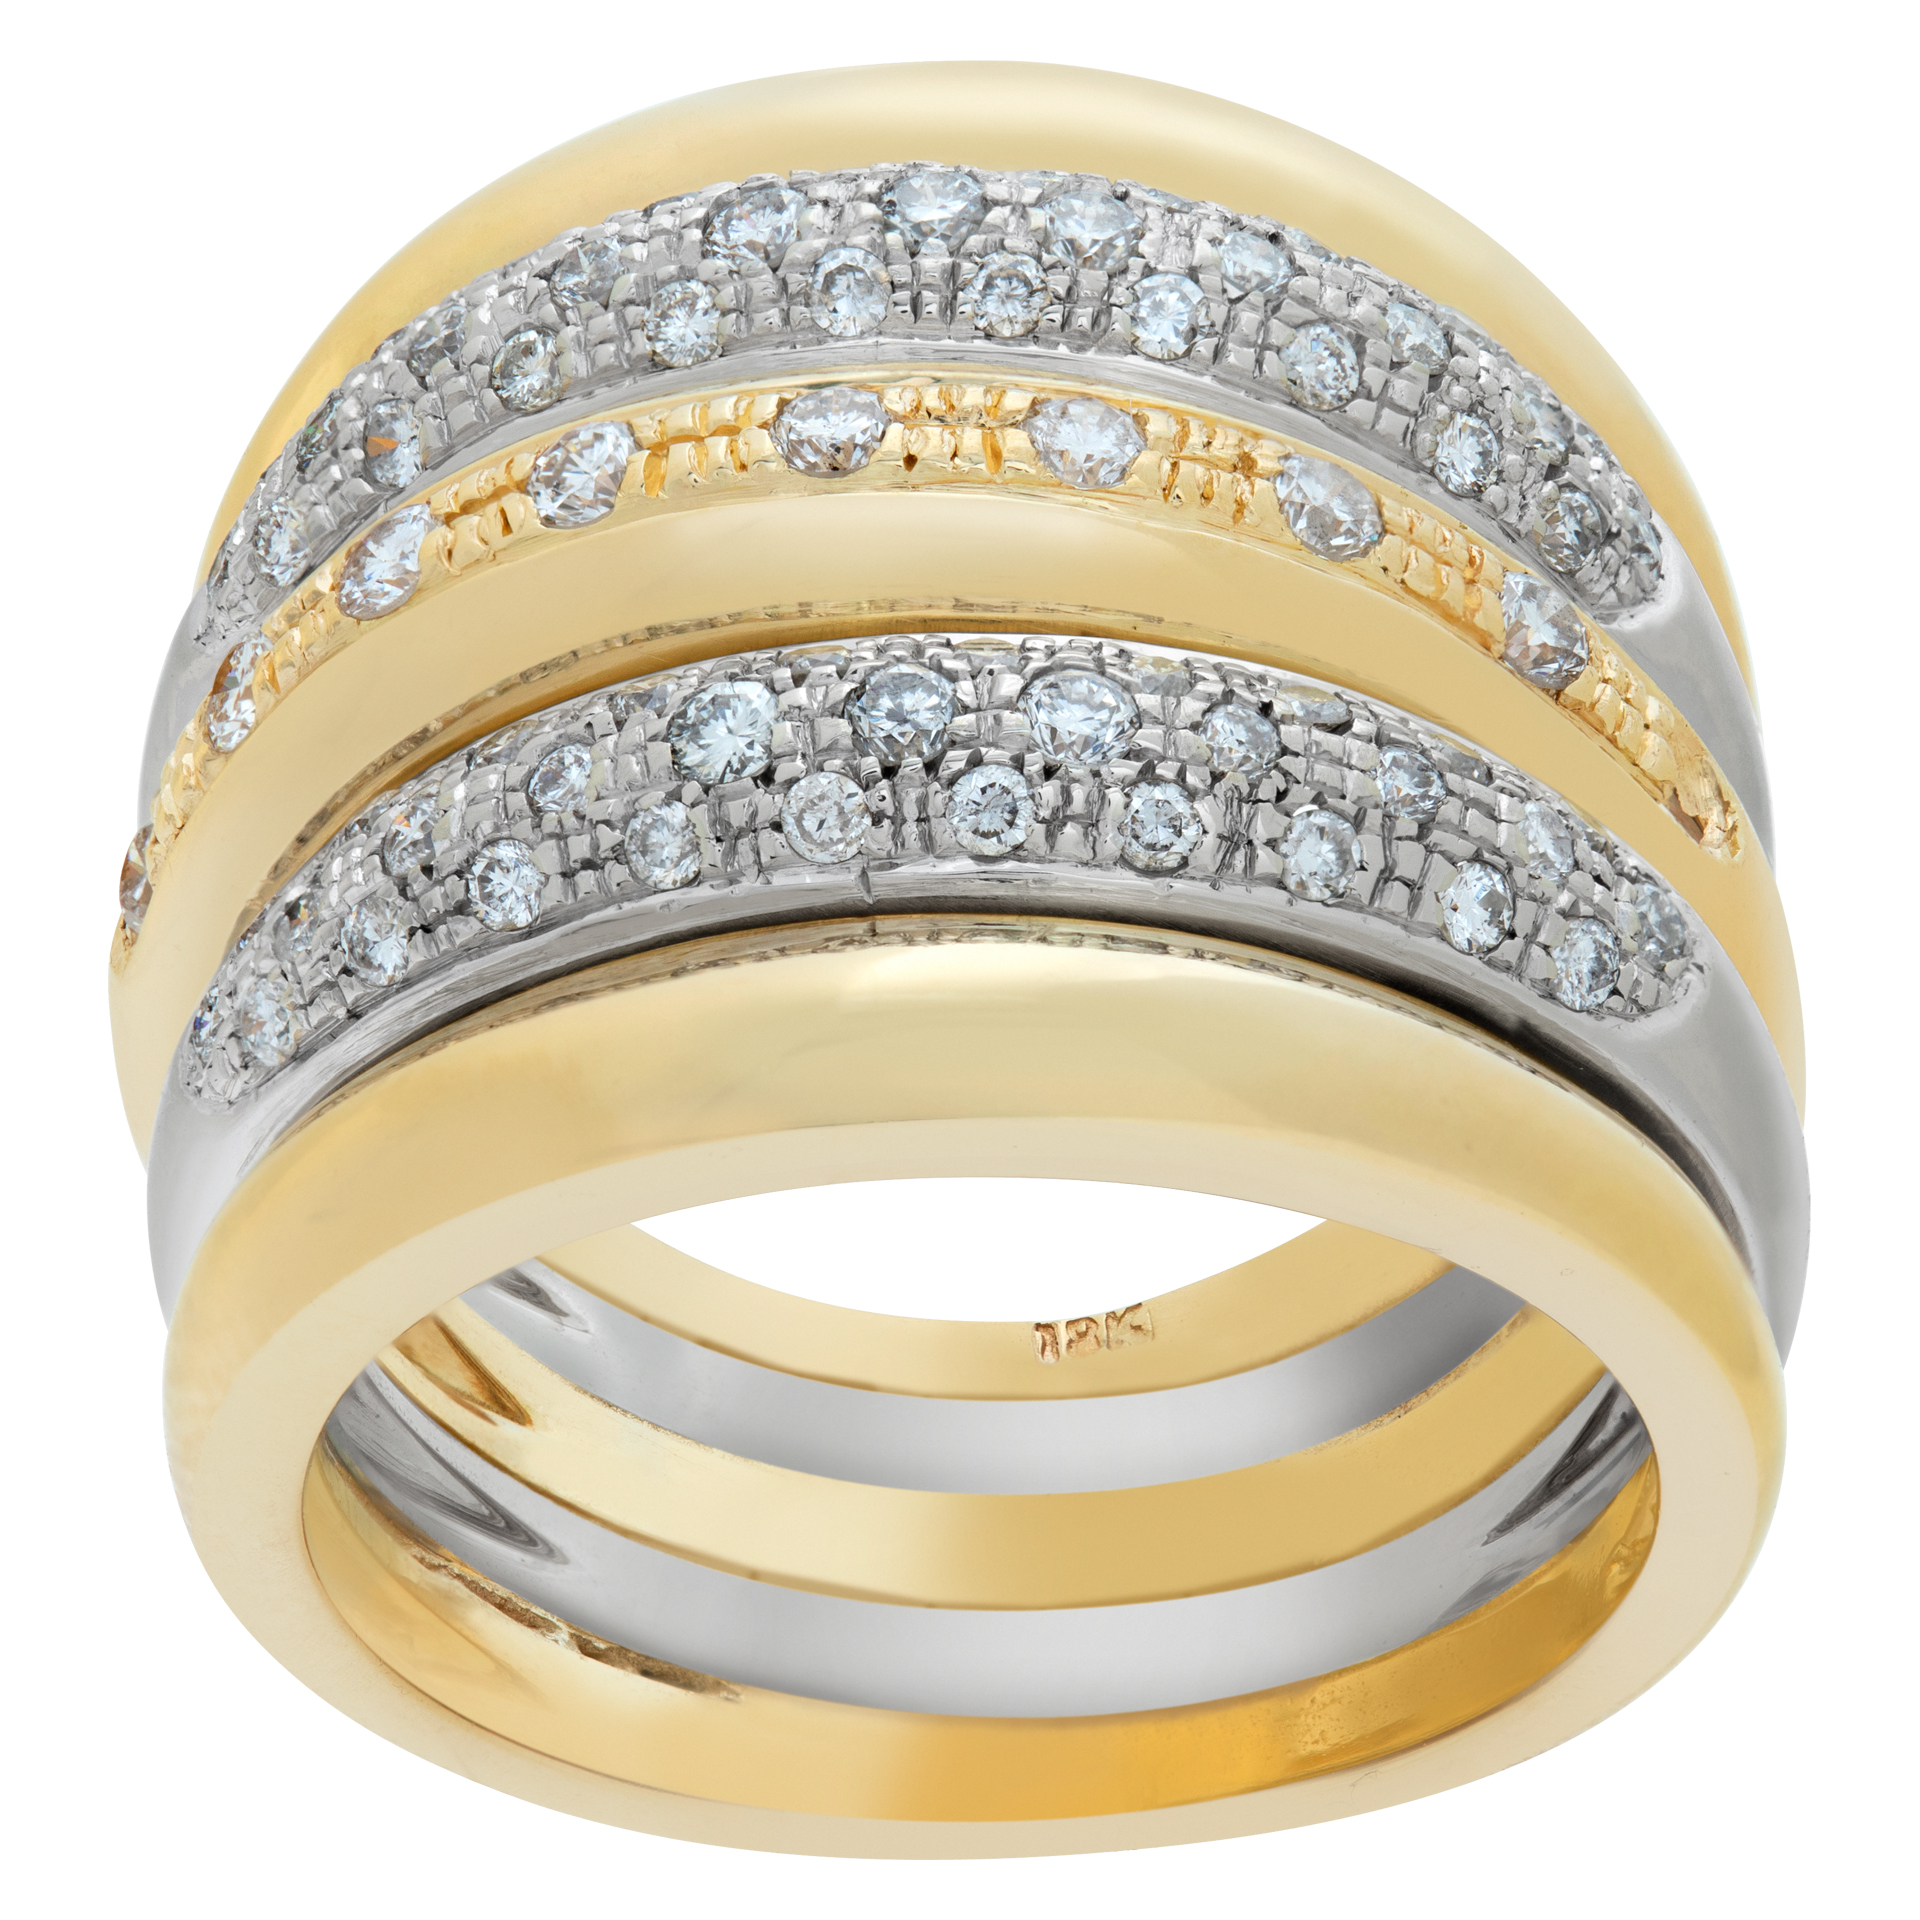 Wide diamonds ring in 18k white and yellow gold. Round brilliant cut diamonds total approx. weight: 1.00 carat, image 1